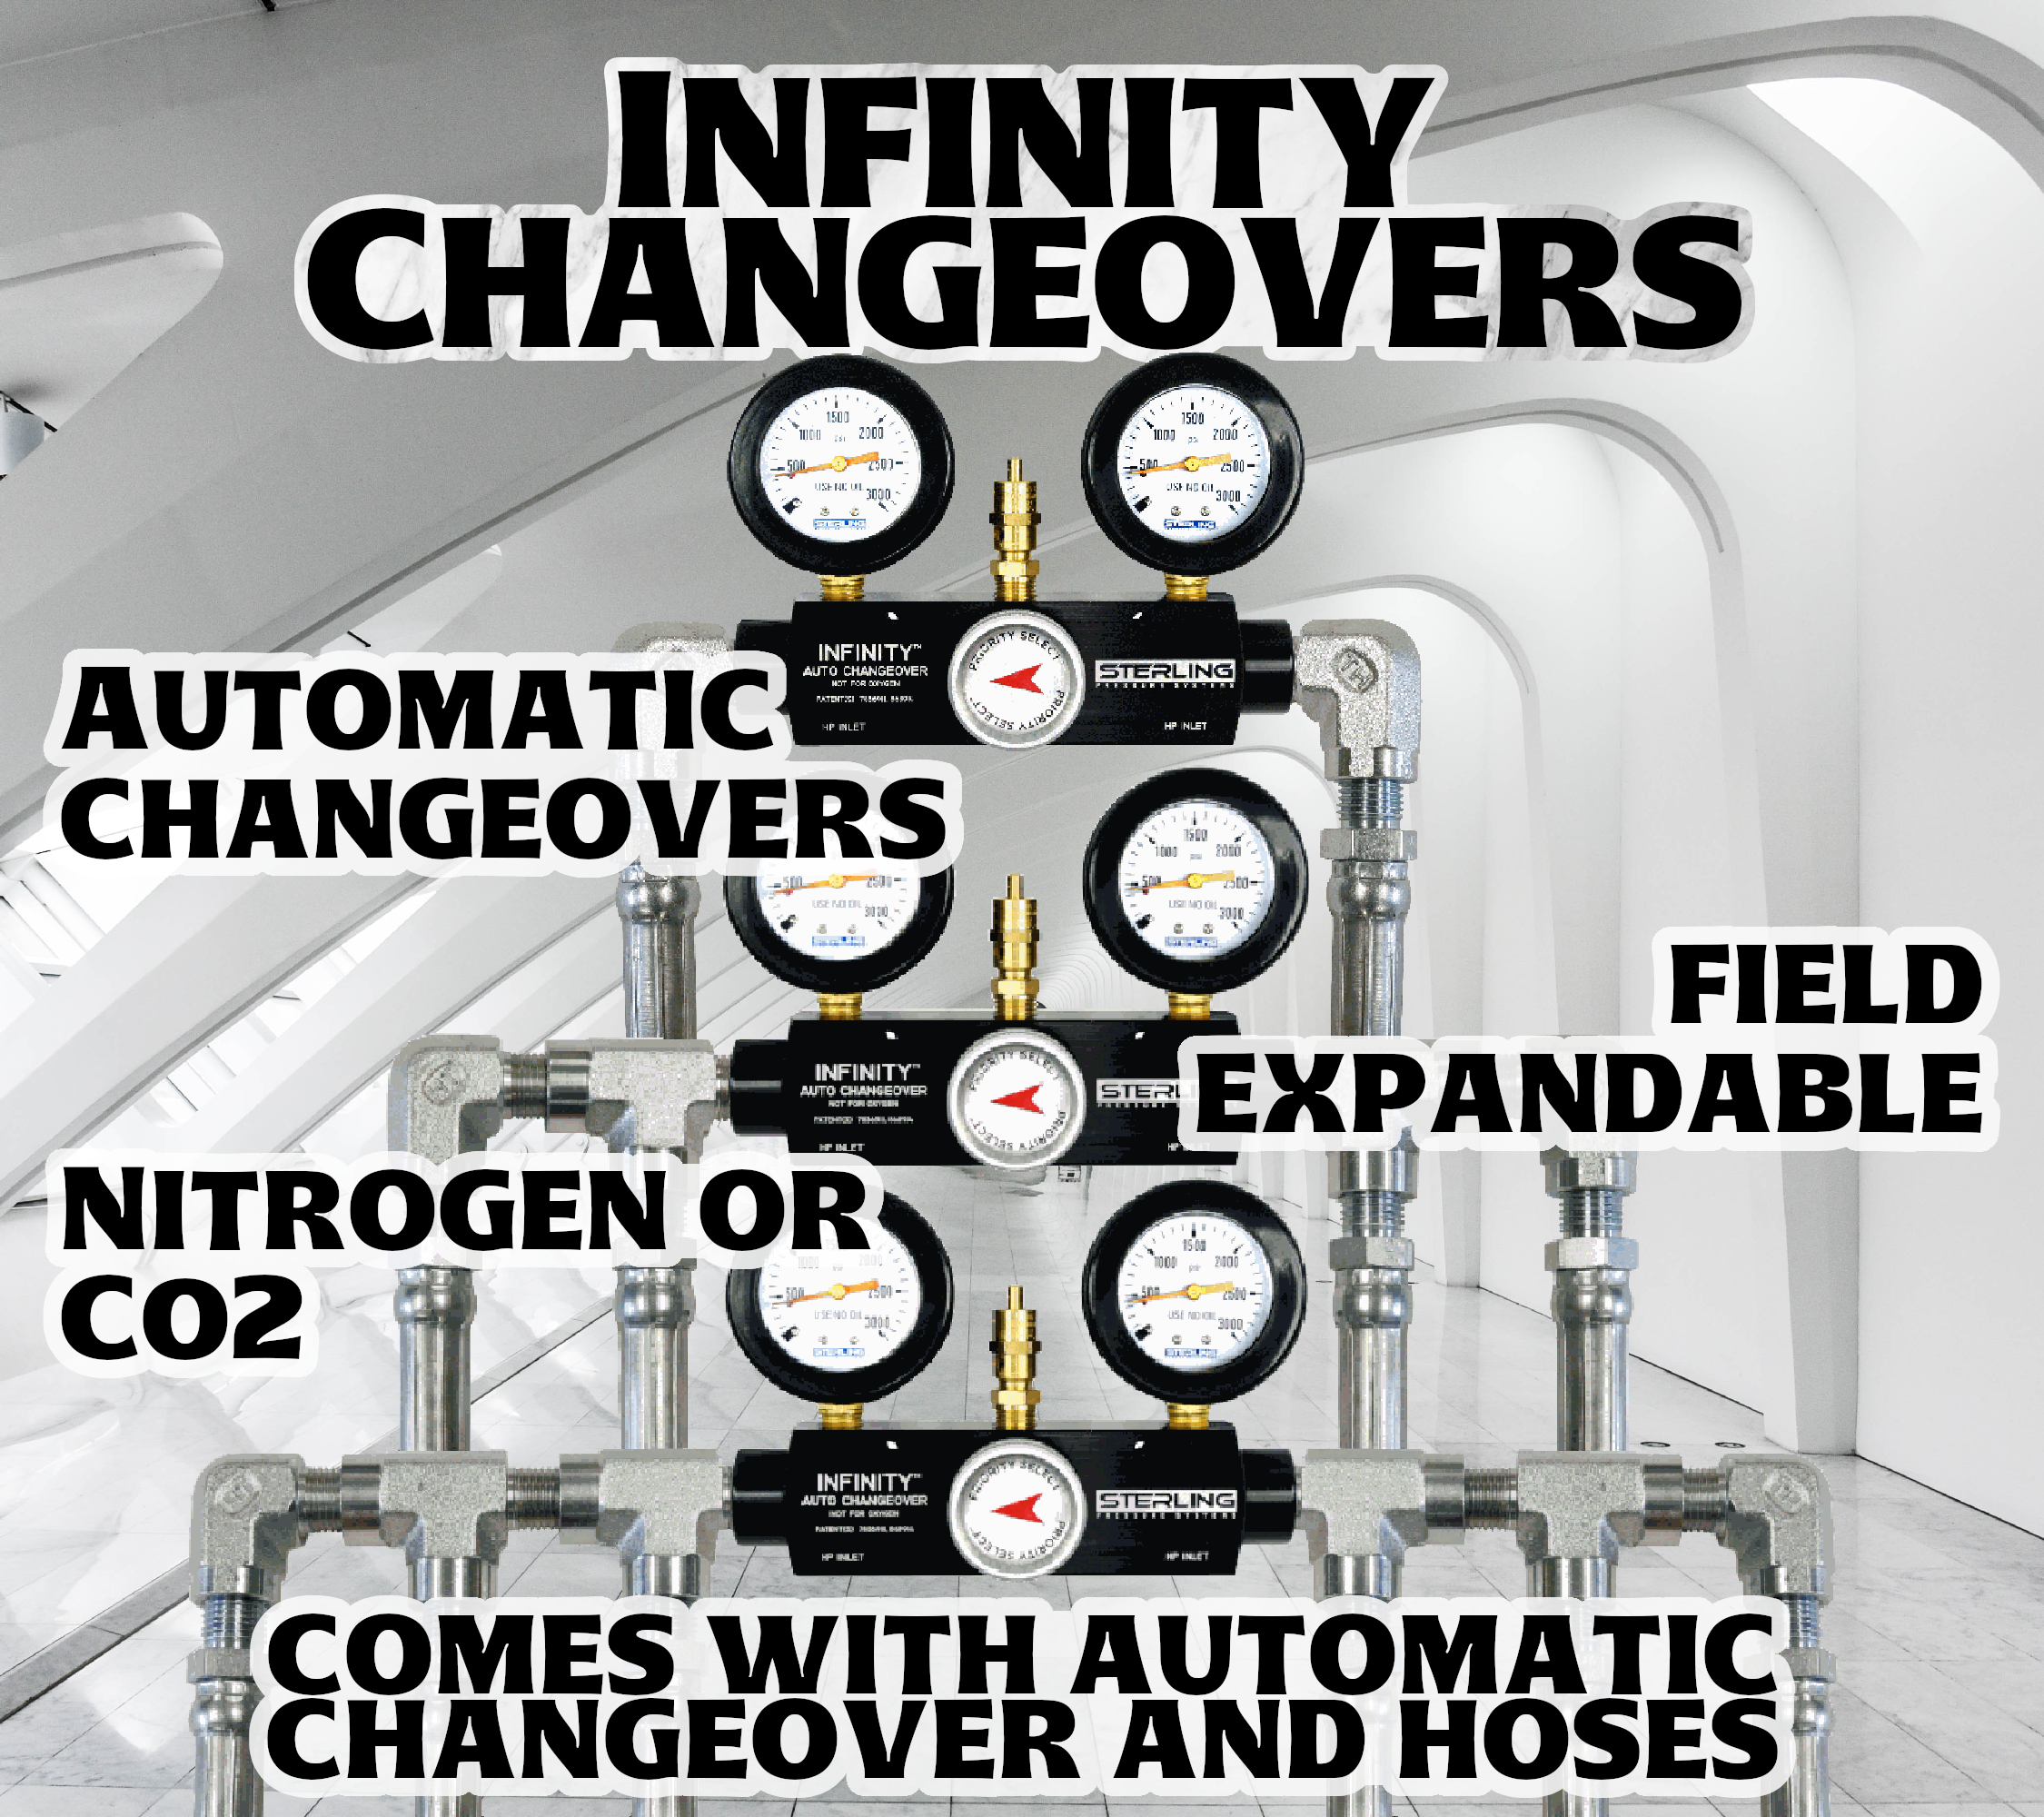 Infinity Changeovers now available